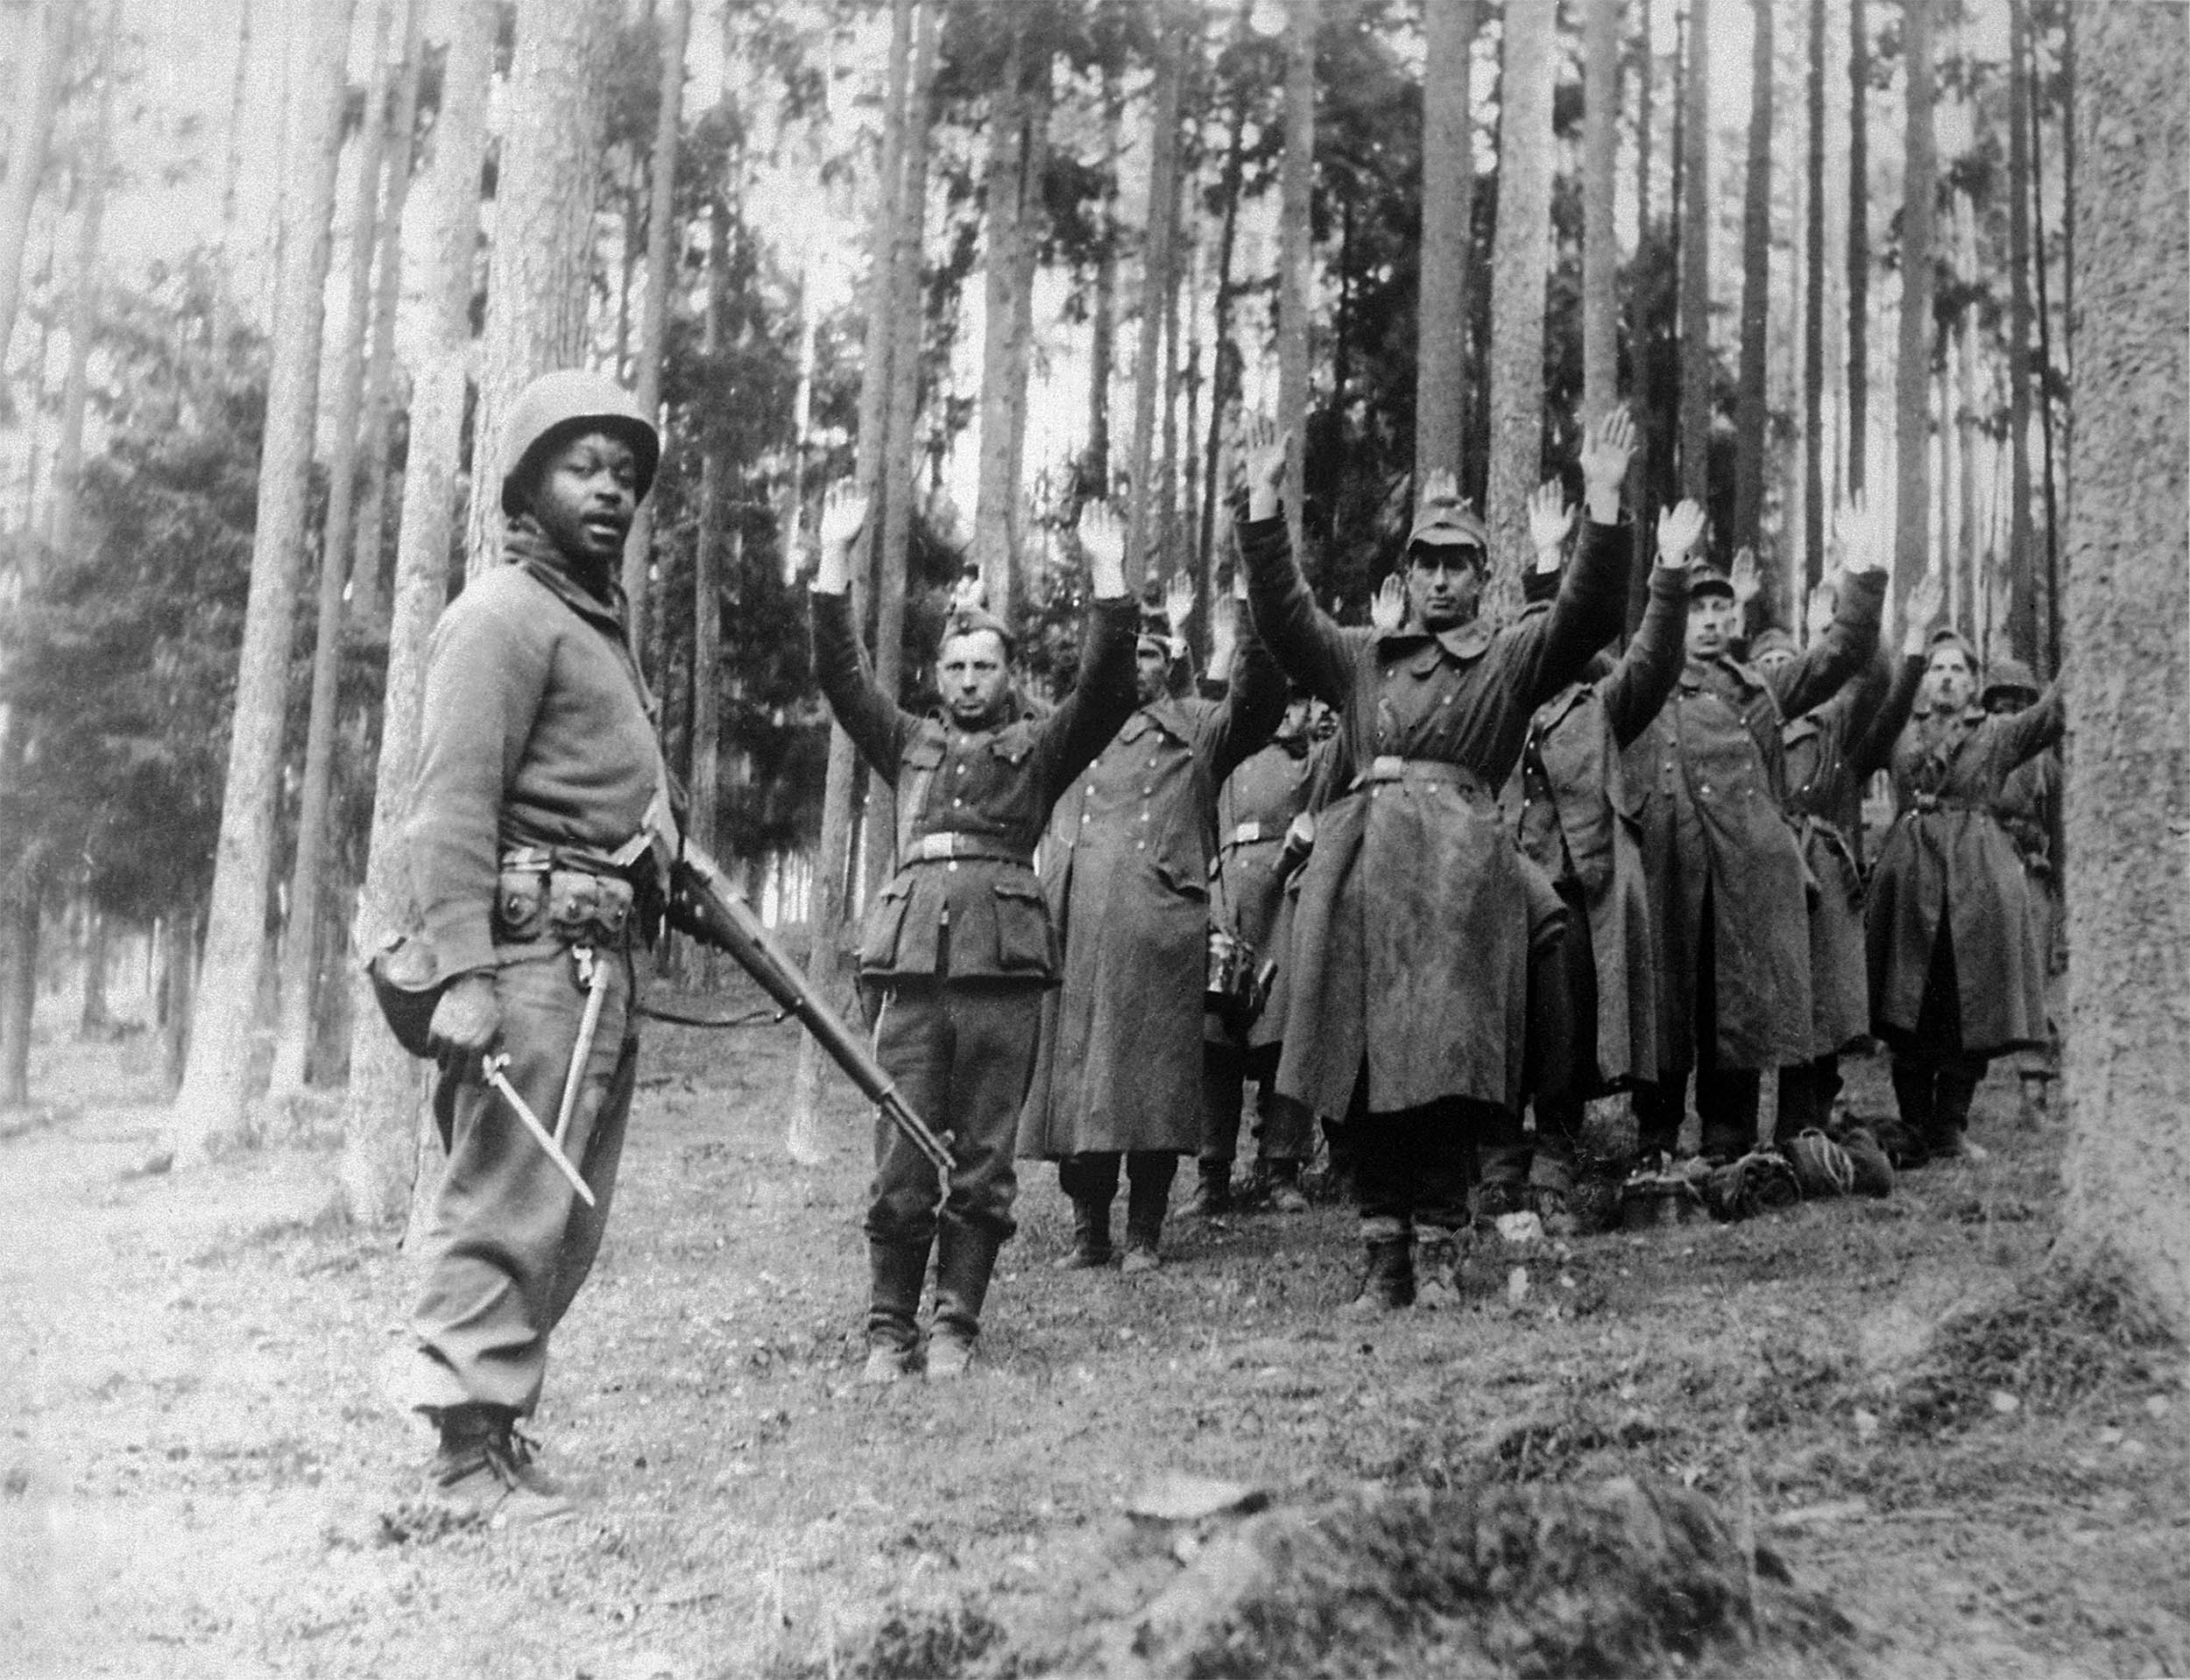 Soldier with 12th Armored Division stands guard over group of Nazi prisoners, April 1945 (National Archives and Records Administration)